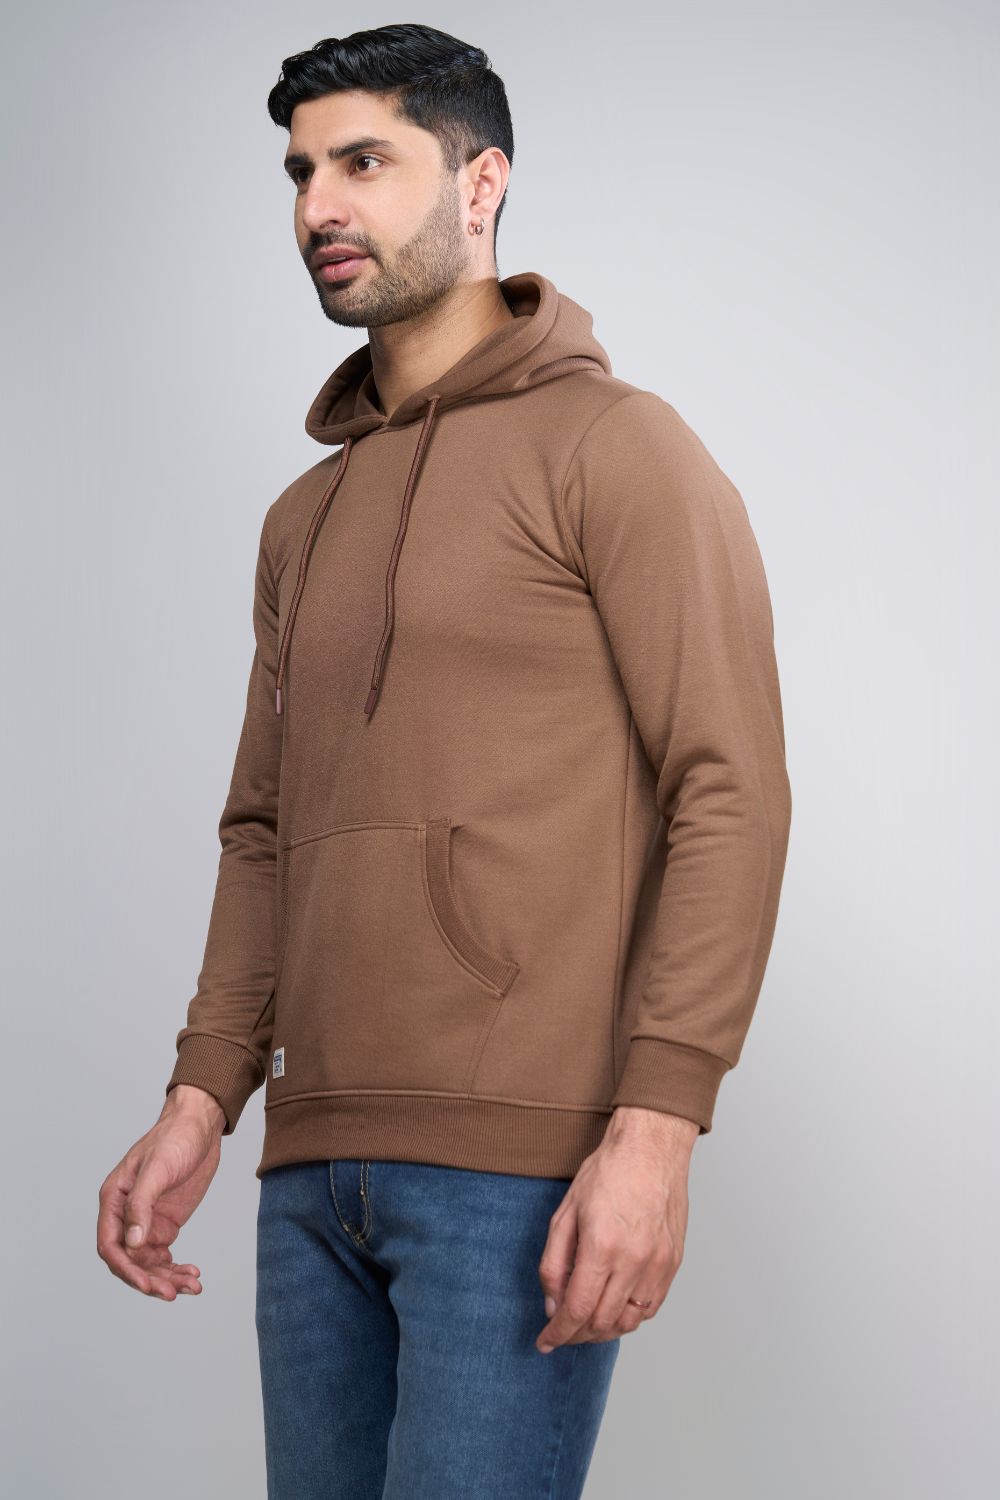 Dark Tan colored, hoodie for men with full sleeves and relaxed fit, side view.